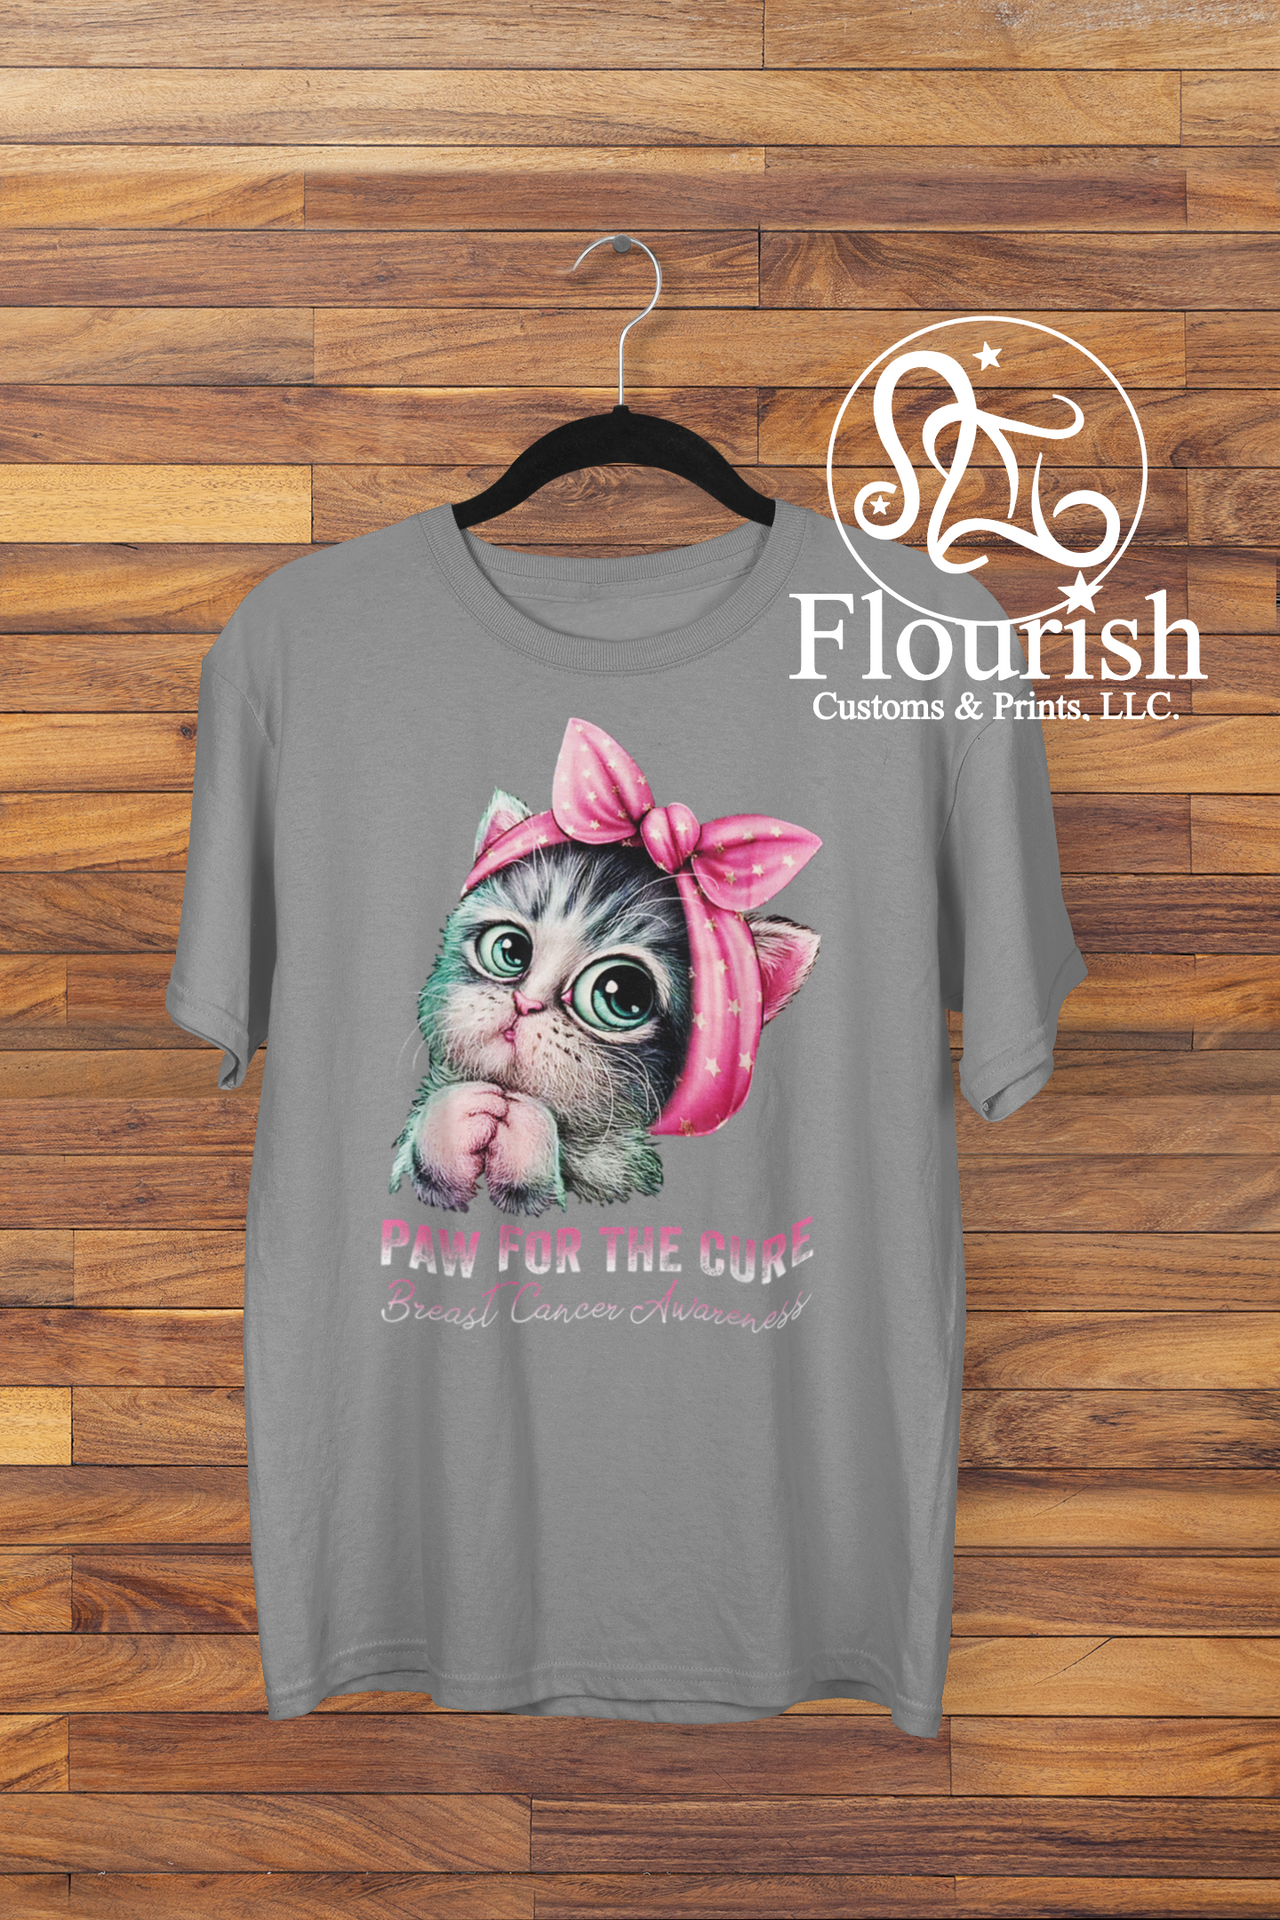 Paw For Cure (Breast Cancer) Tee